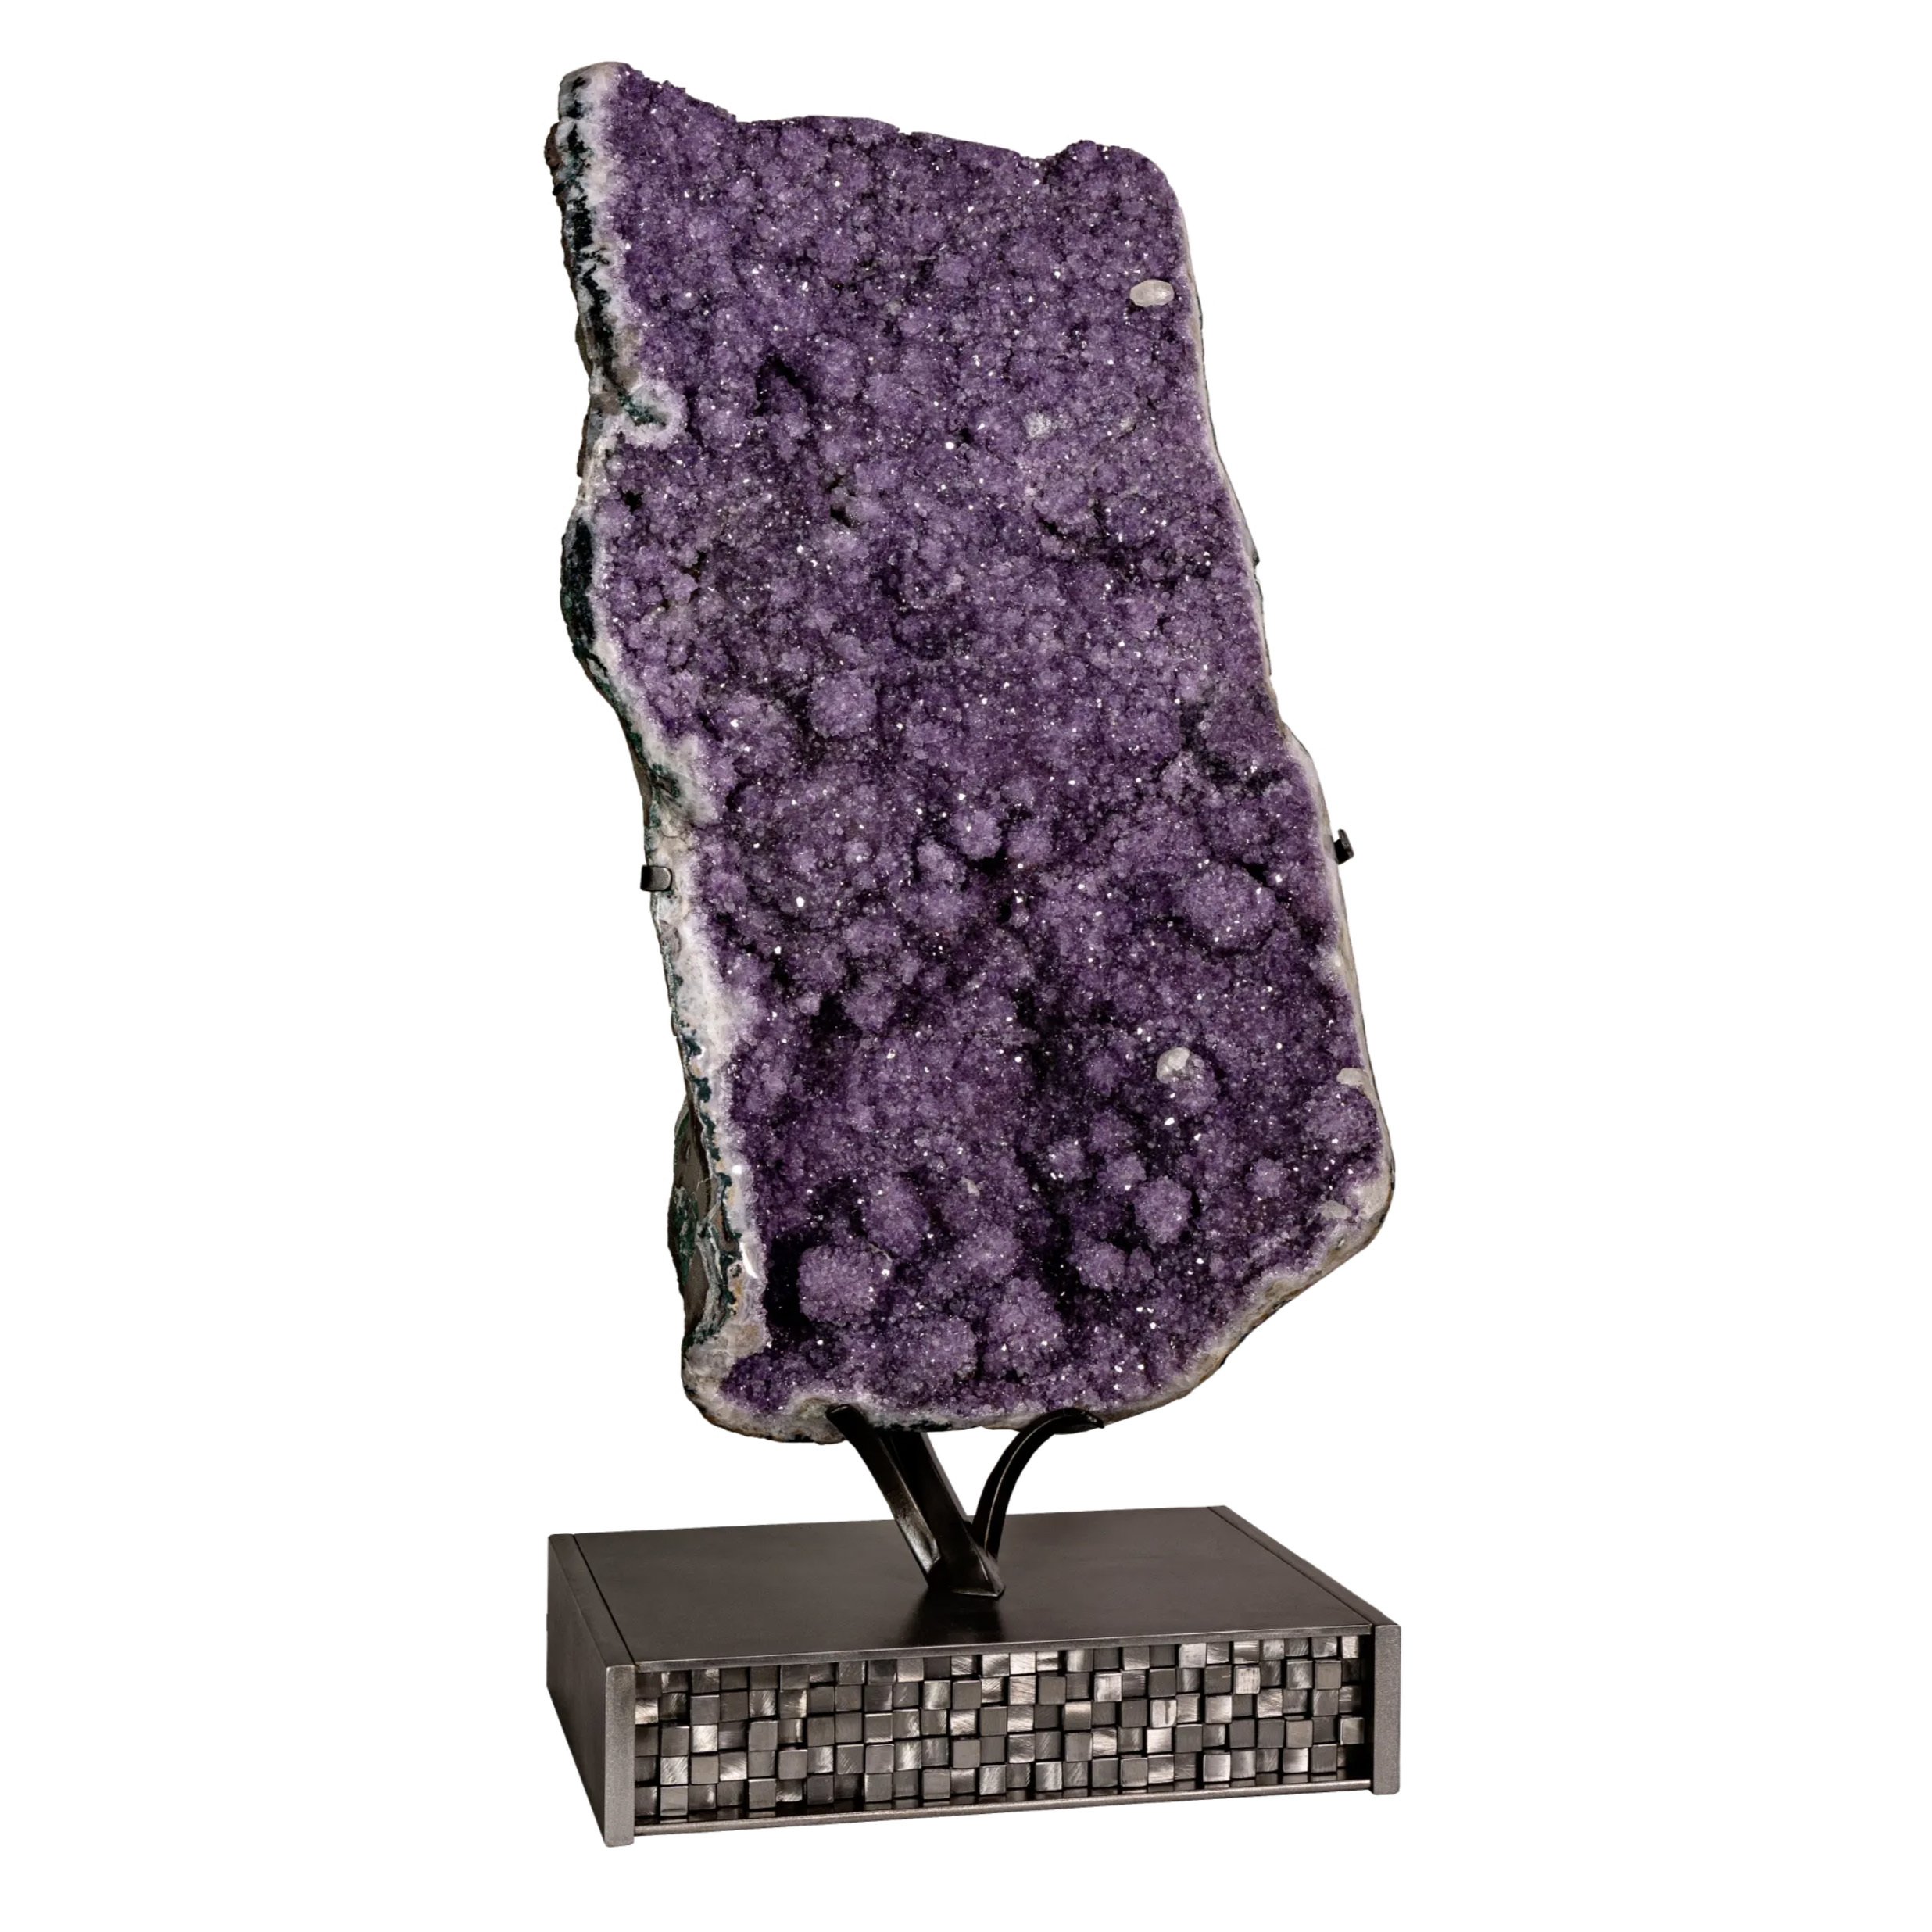 Amethyst Geode In Custom Pixel Stand with Calcite Inclusions & Prominent Stalactite Bubbles